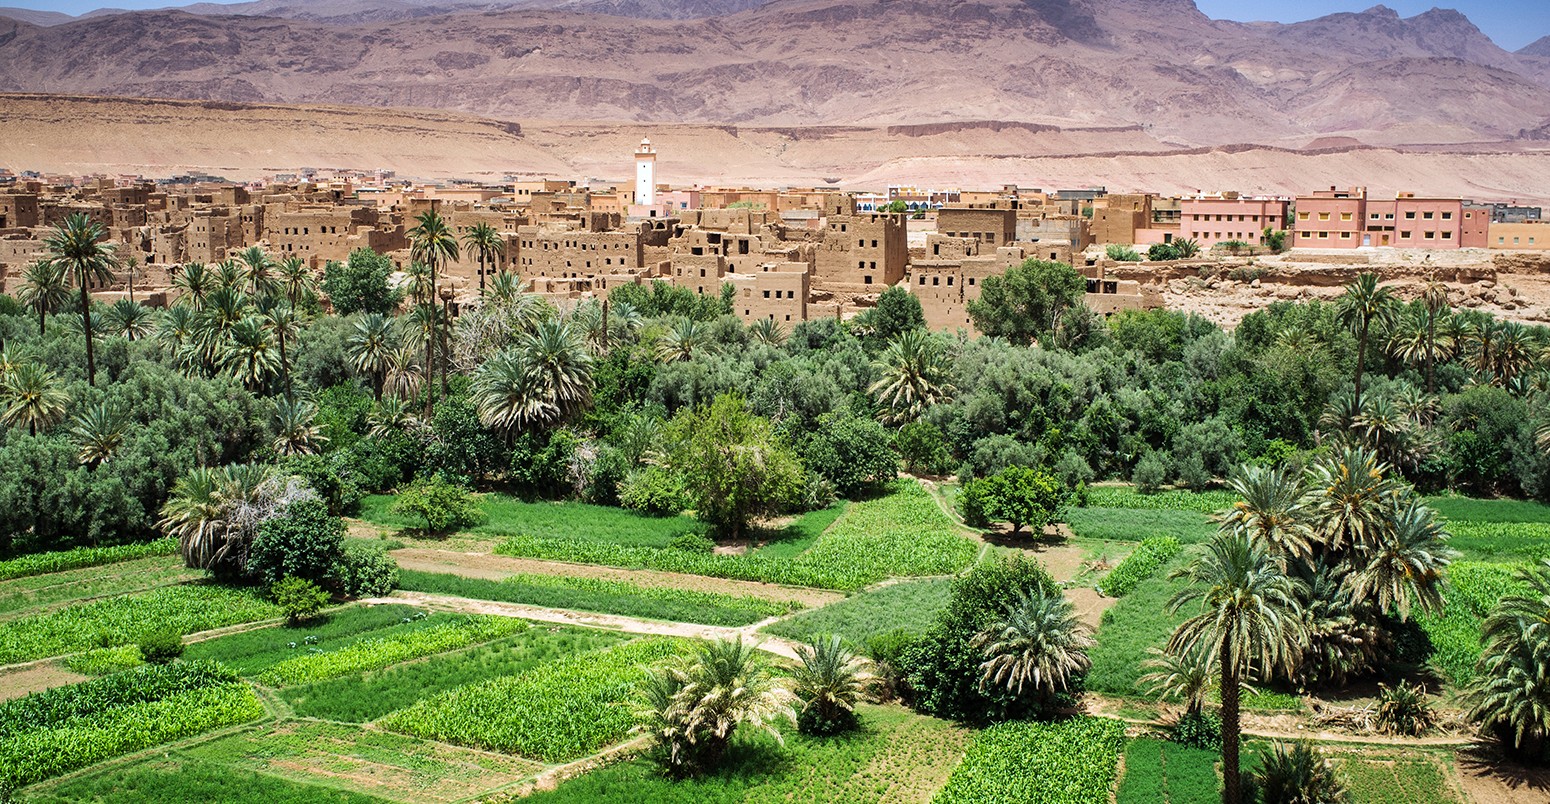 Oasis in the Dade valley, Morocco